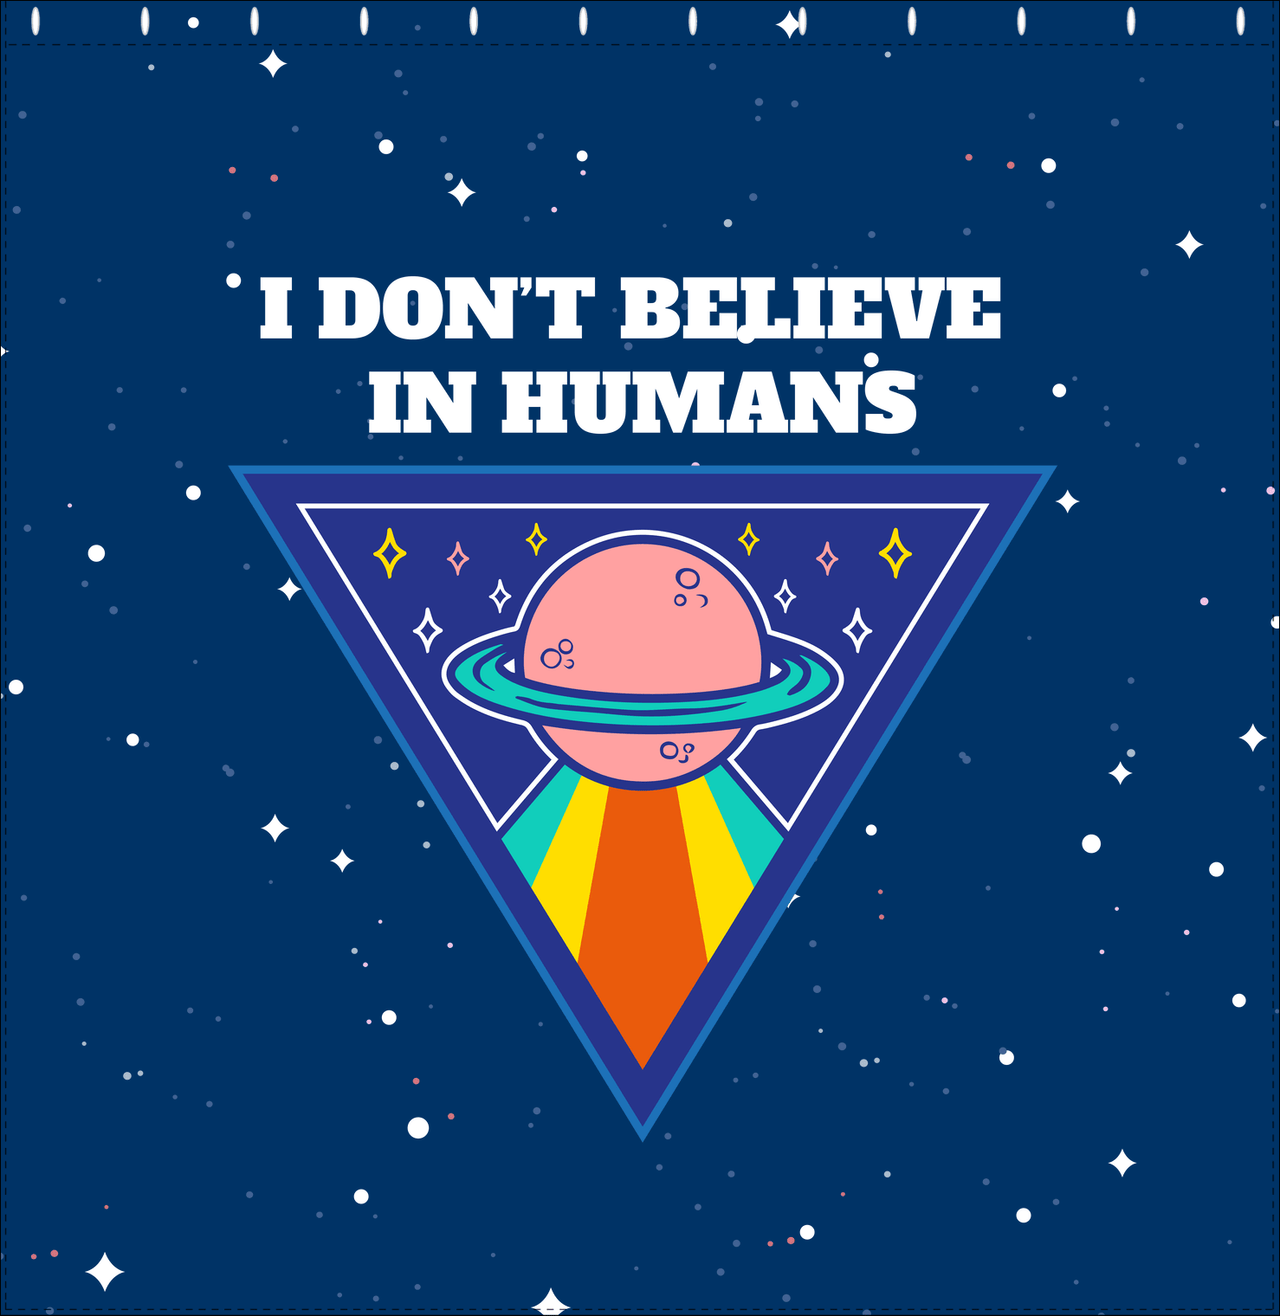 Aliens / UFO Shower Curtain - I Don't Believe in Humans - Decorate View